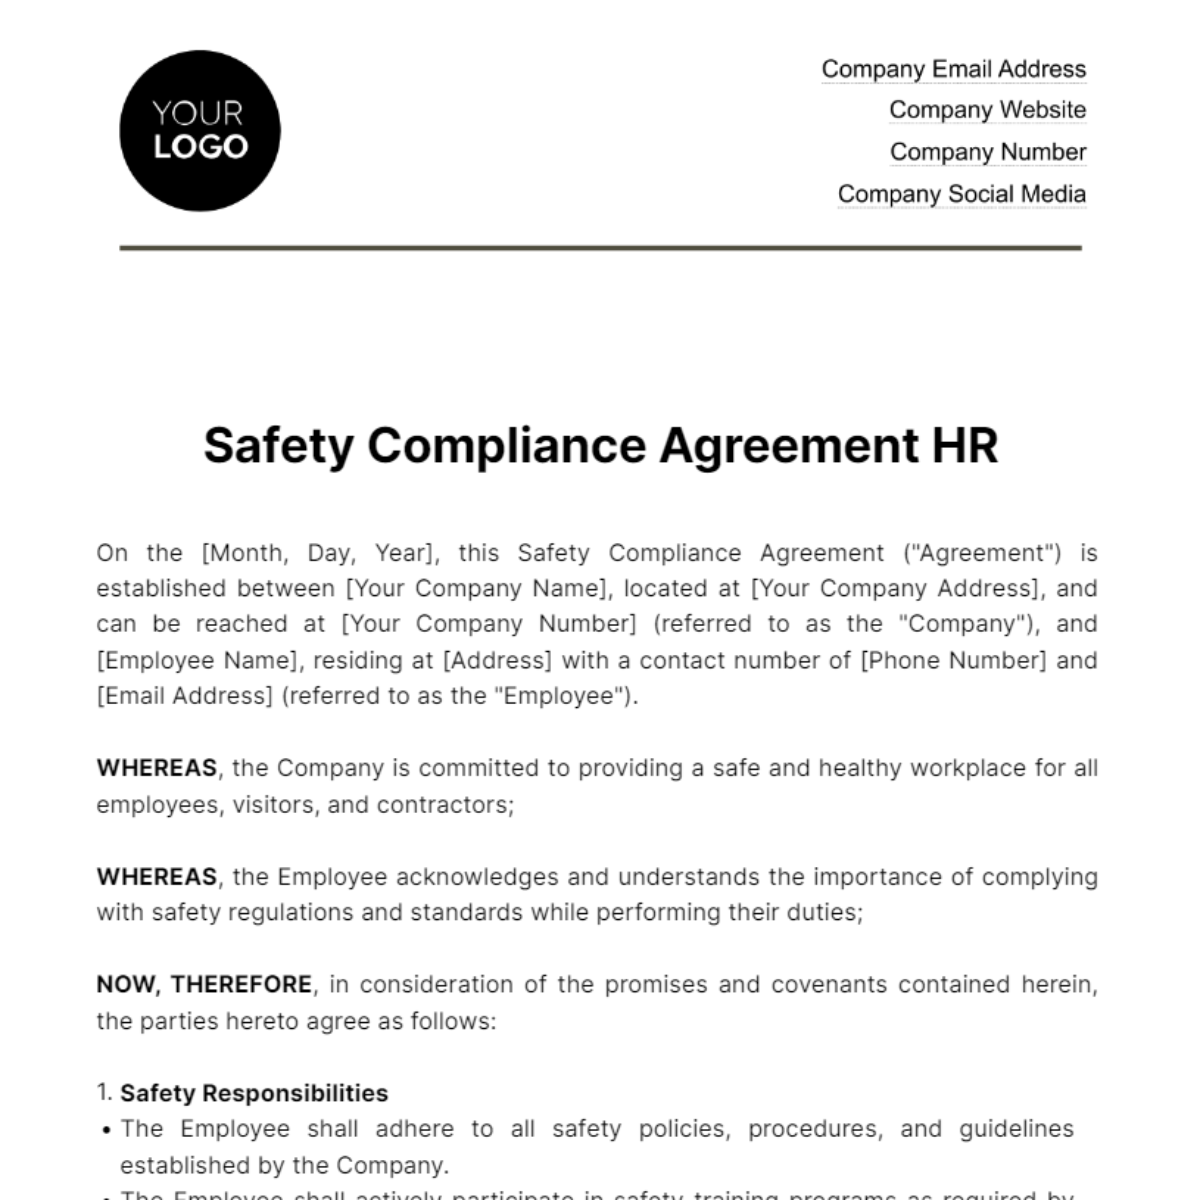 Safety Compliance Agreement HR Template